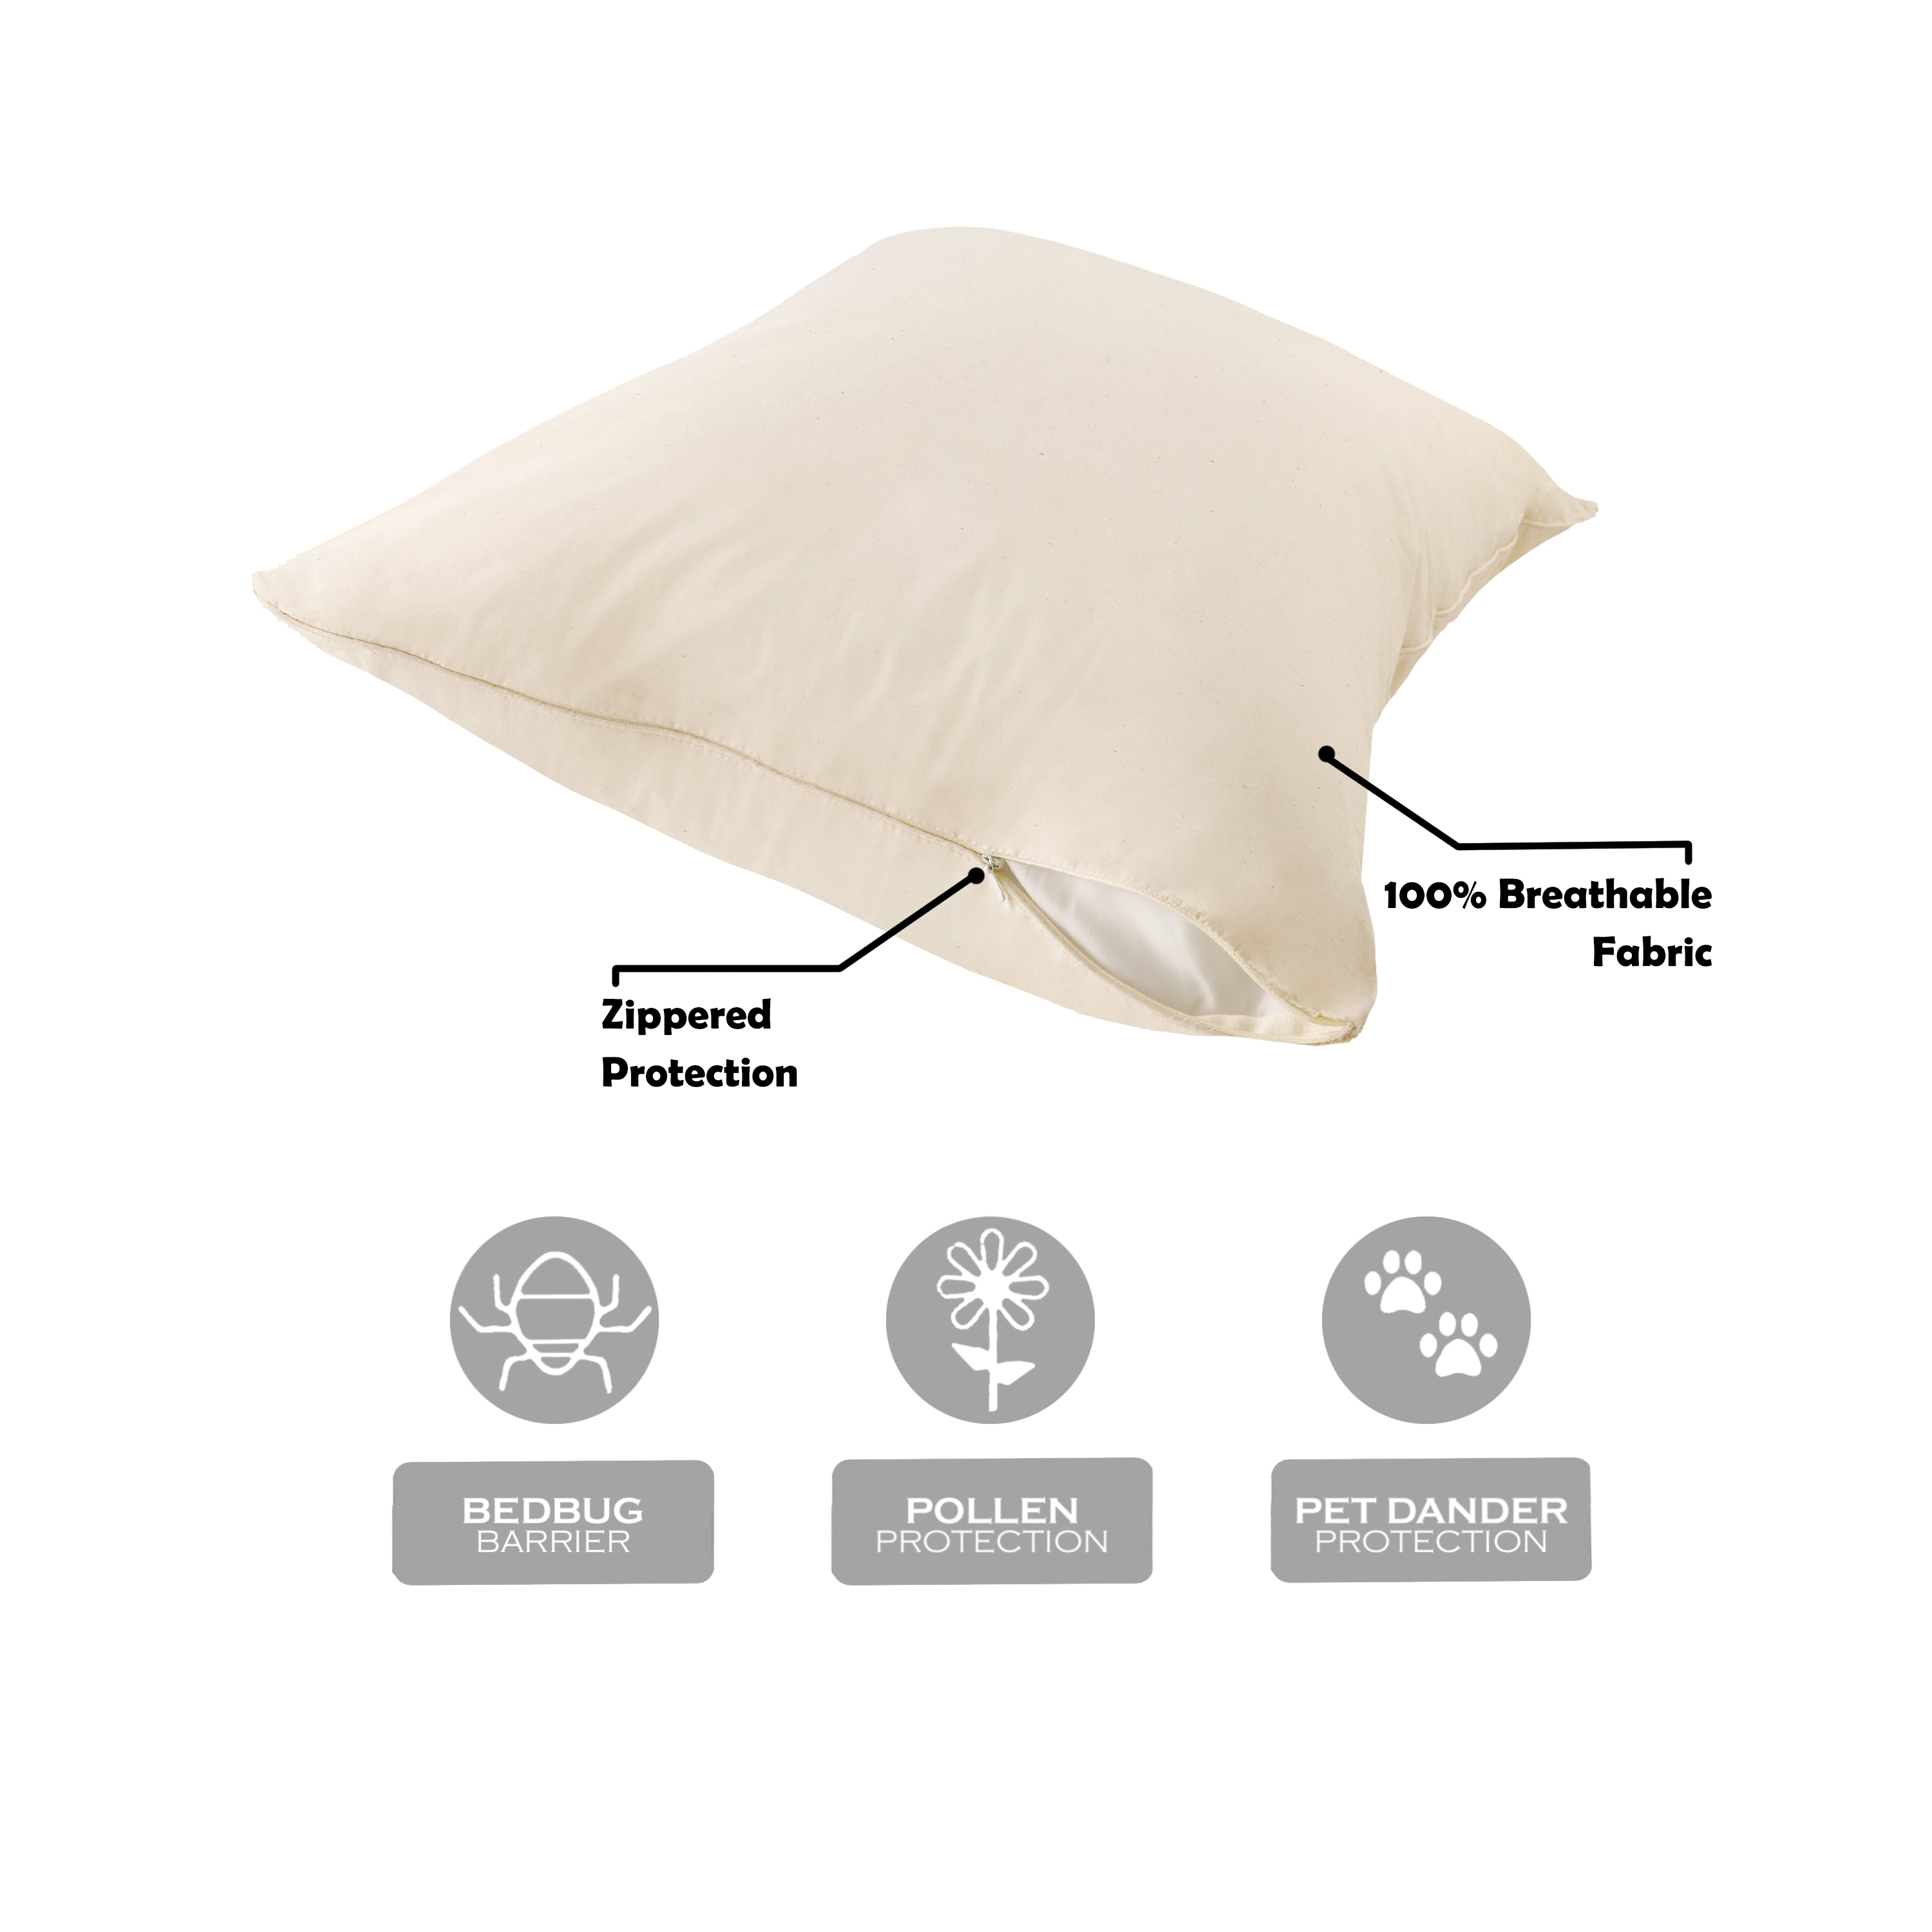 Allerease Organic Cotton Zippered Pillow Protector, Standard/Queen - image 3 of 7